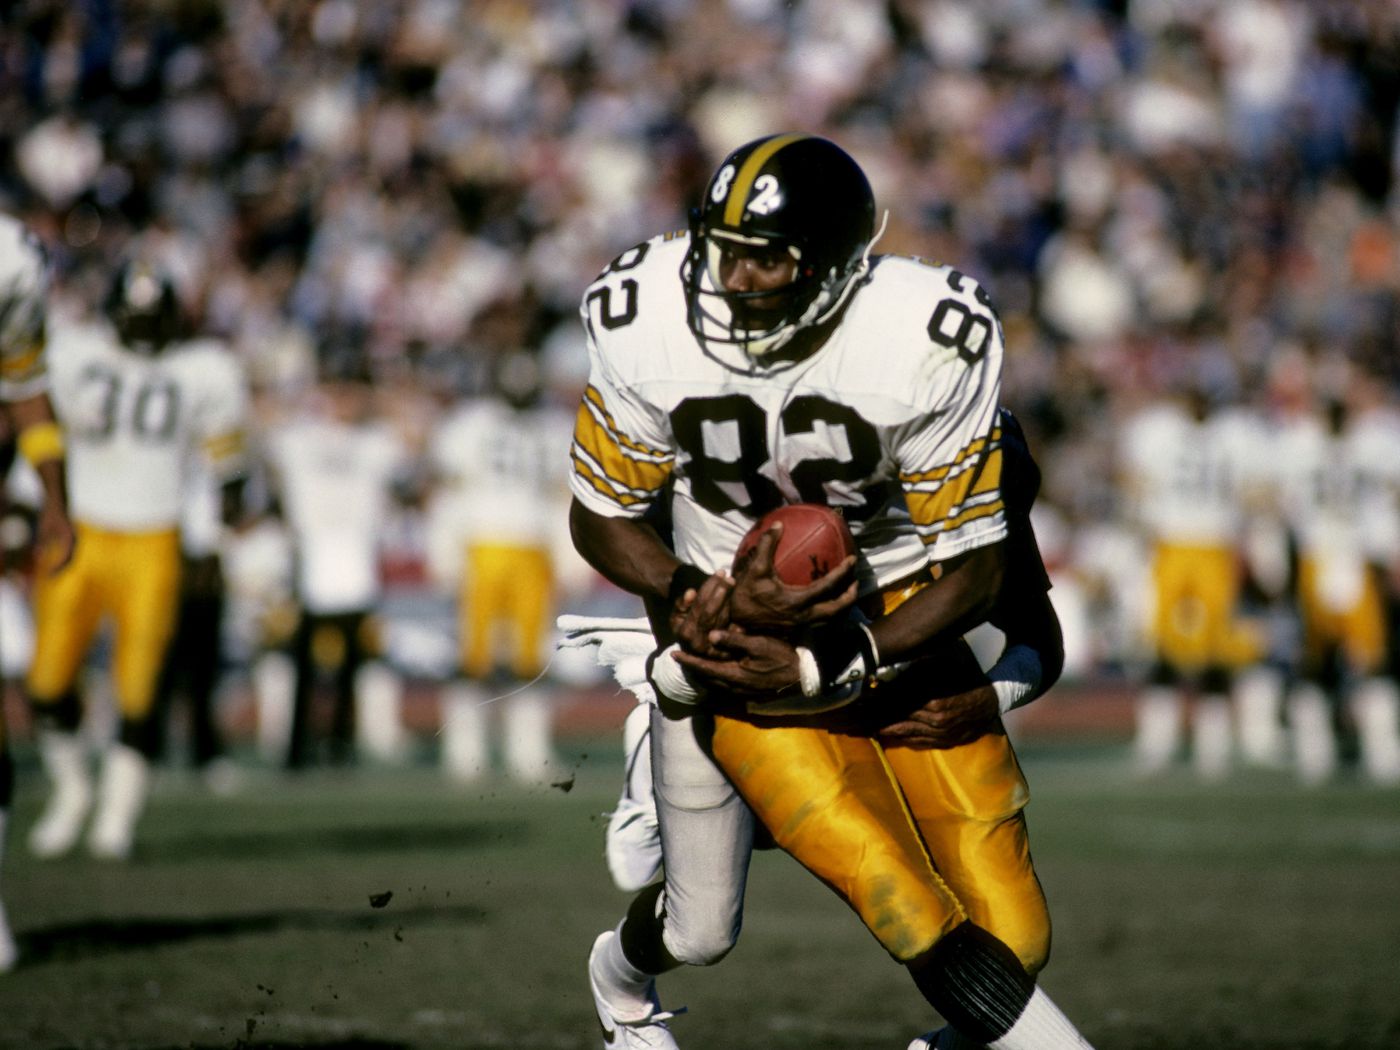 Who were the most notable Pittsburgh Steelers to wear number 82